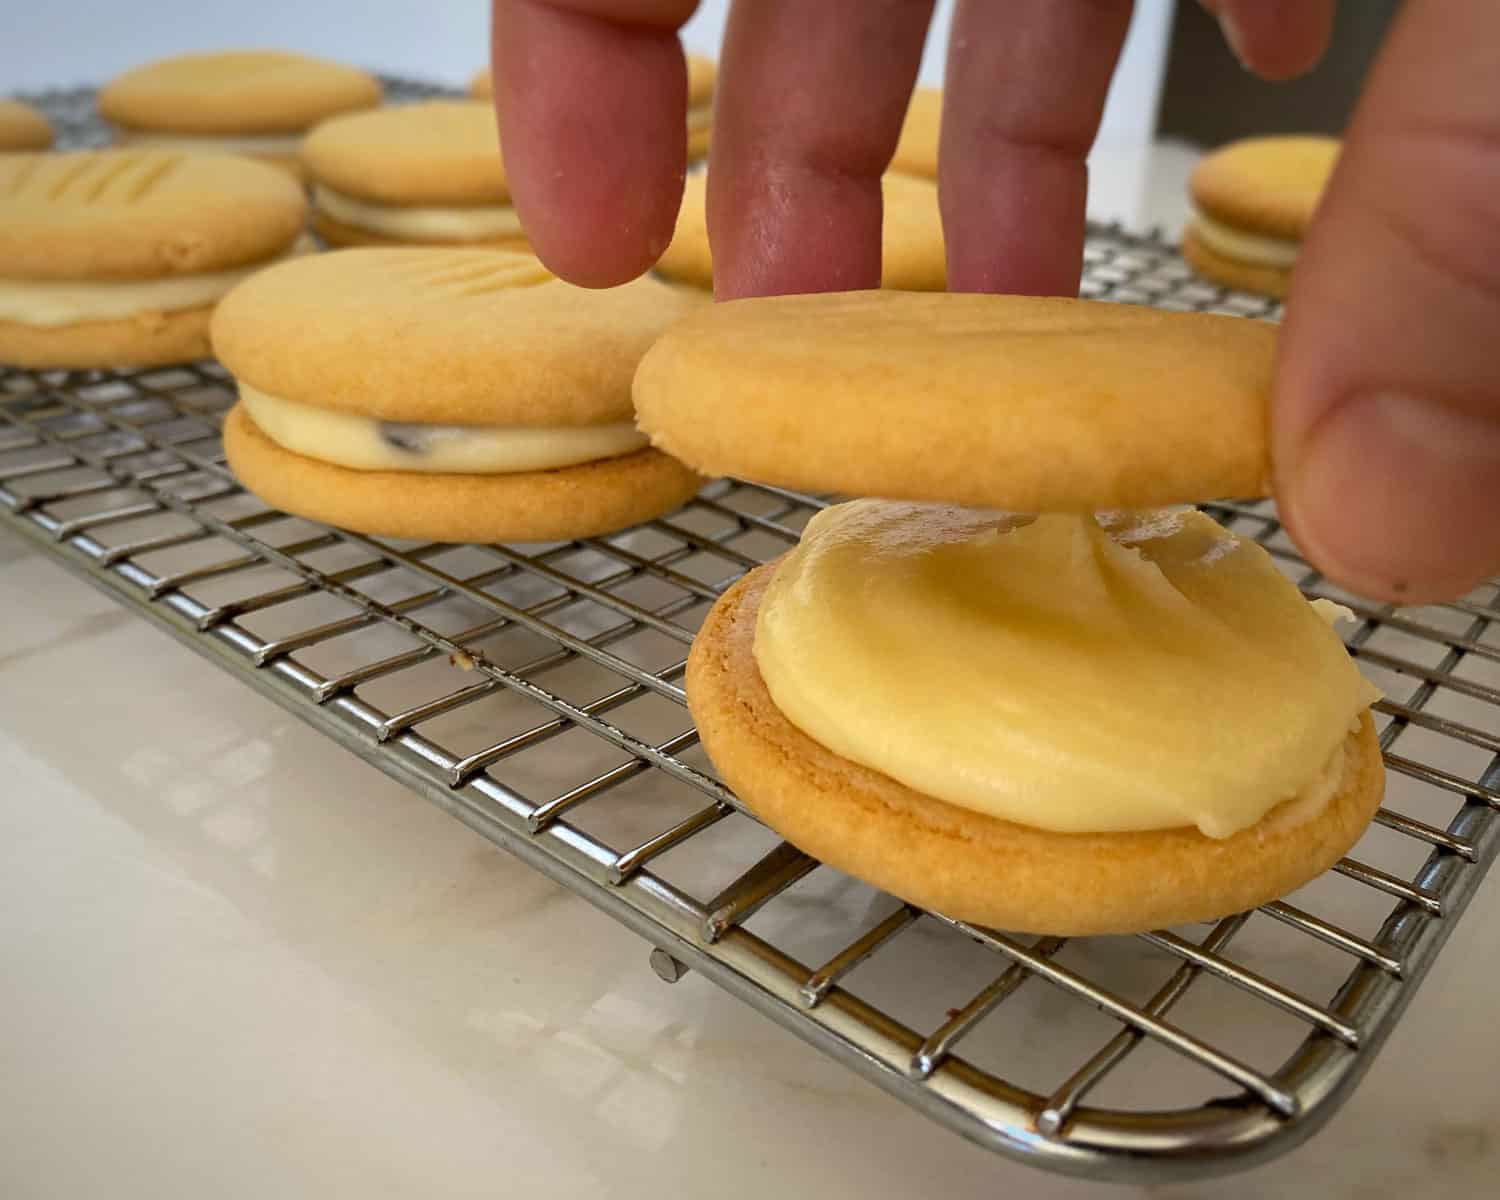  A hand sandwiching two biscuits together with icing.